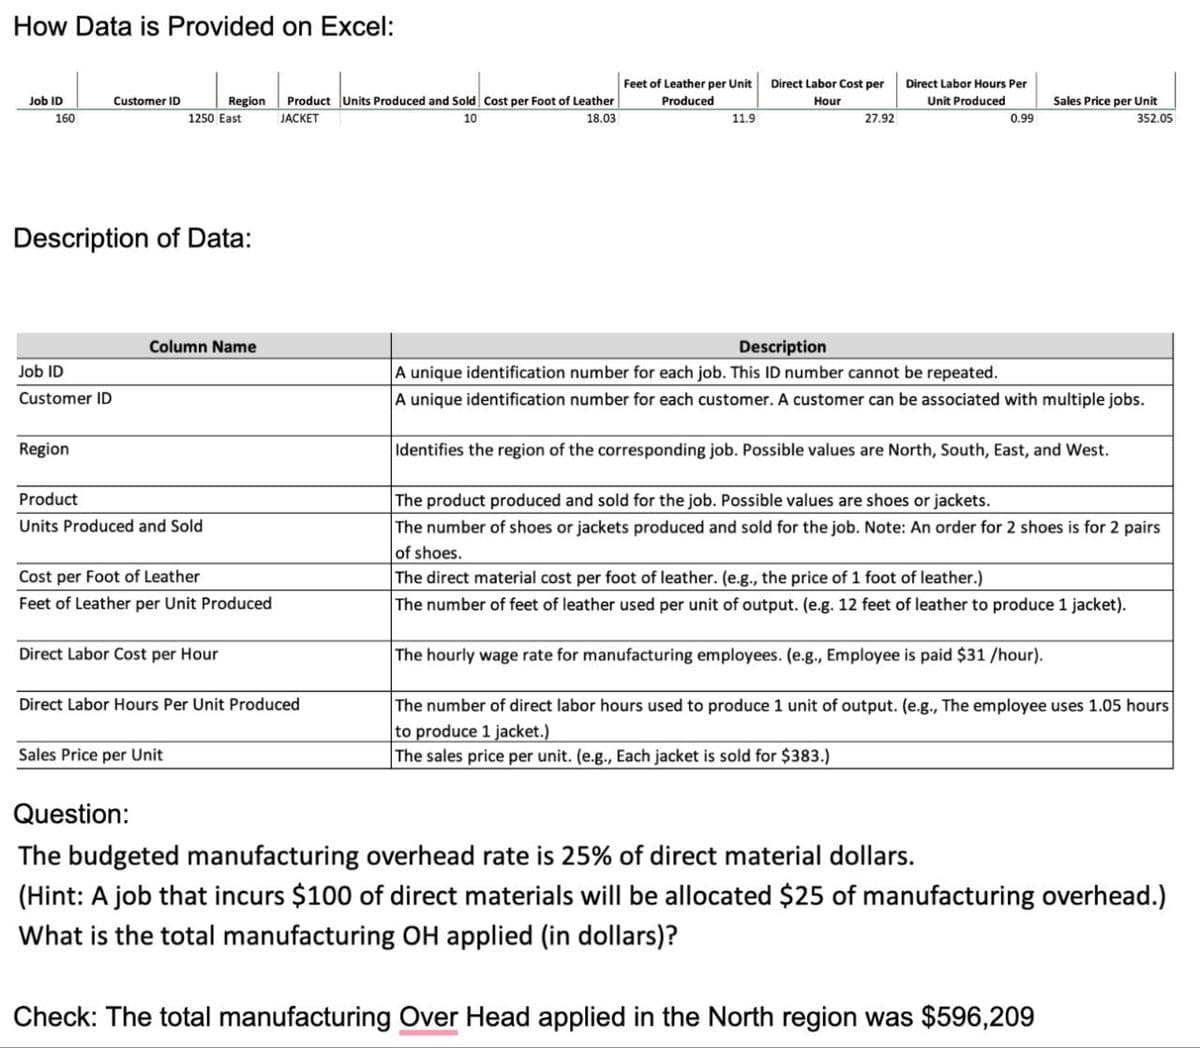 How Data is Provided on Excel:
Job ID
Customer ID
160
Region
1250 East
Product Units Produced and Sold Cost per Foot of Leather
JACKET
10
Feet of Leather per Unit
Produced
Direct Labor Cost per
Hour
Direct Labor Hours Per
Unit Produced
Sales Price per Unit
18.03
11.9
27.92
0.99
352.05
Description of Data:
Job ID
Customer ID
Region
Product
Column Name
Units Produced and Sold
Cost per Foot of Leather
Feet of Leather per Unit Produced
Direct Labor Cost per Hour
Direct Labor Hours Per Unit Produced
Description
A unique identification number for each job. This ID number cannot be repeated.
A unique identification number for each customer. A customer can be associated with multiple jobs.
Identifies the region of the corresponding job. Possible values are North, South, East, and West.
The product produced and sold for the job. Possible values are shoes or jackets.
The number of shoes or jackets produced and sold for the job. Note: An order for 2 shoes is for 2 pairs
of shoes.
The direct material cost per foot of leather. (e.g., the price of 1 foot of leather.)
The number of feet of leather used per unit of output. (e.g. 12 feet of leather to produce 1 jacket).
The hourly wage rate for manufacturing employees. (e.g., Employee is paid $31/hour).
The number of direct labor hours used to produce 1 unit of output. (e.g., The employee uses 1.05 hours
to produce 1 jacket.)
The sales price per unit. (e.g., Each jacket is sold for $383.)
Sales Price per Unit
Question:
The budgeted manufacturing overhead rate is 25% of direct material dollars.
(Hint: A job that incurs $100 of direct materials will be allocated $25 of manufacturing overhead.)
What is the total manufacturing OH applied (in dollars)?
Check: The total manufacturing Over Head applied in the North region was $596,209